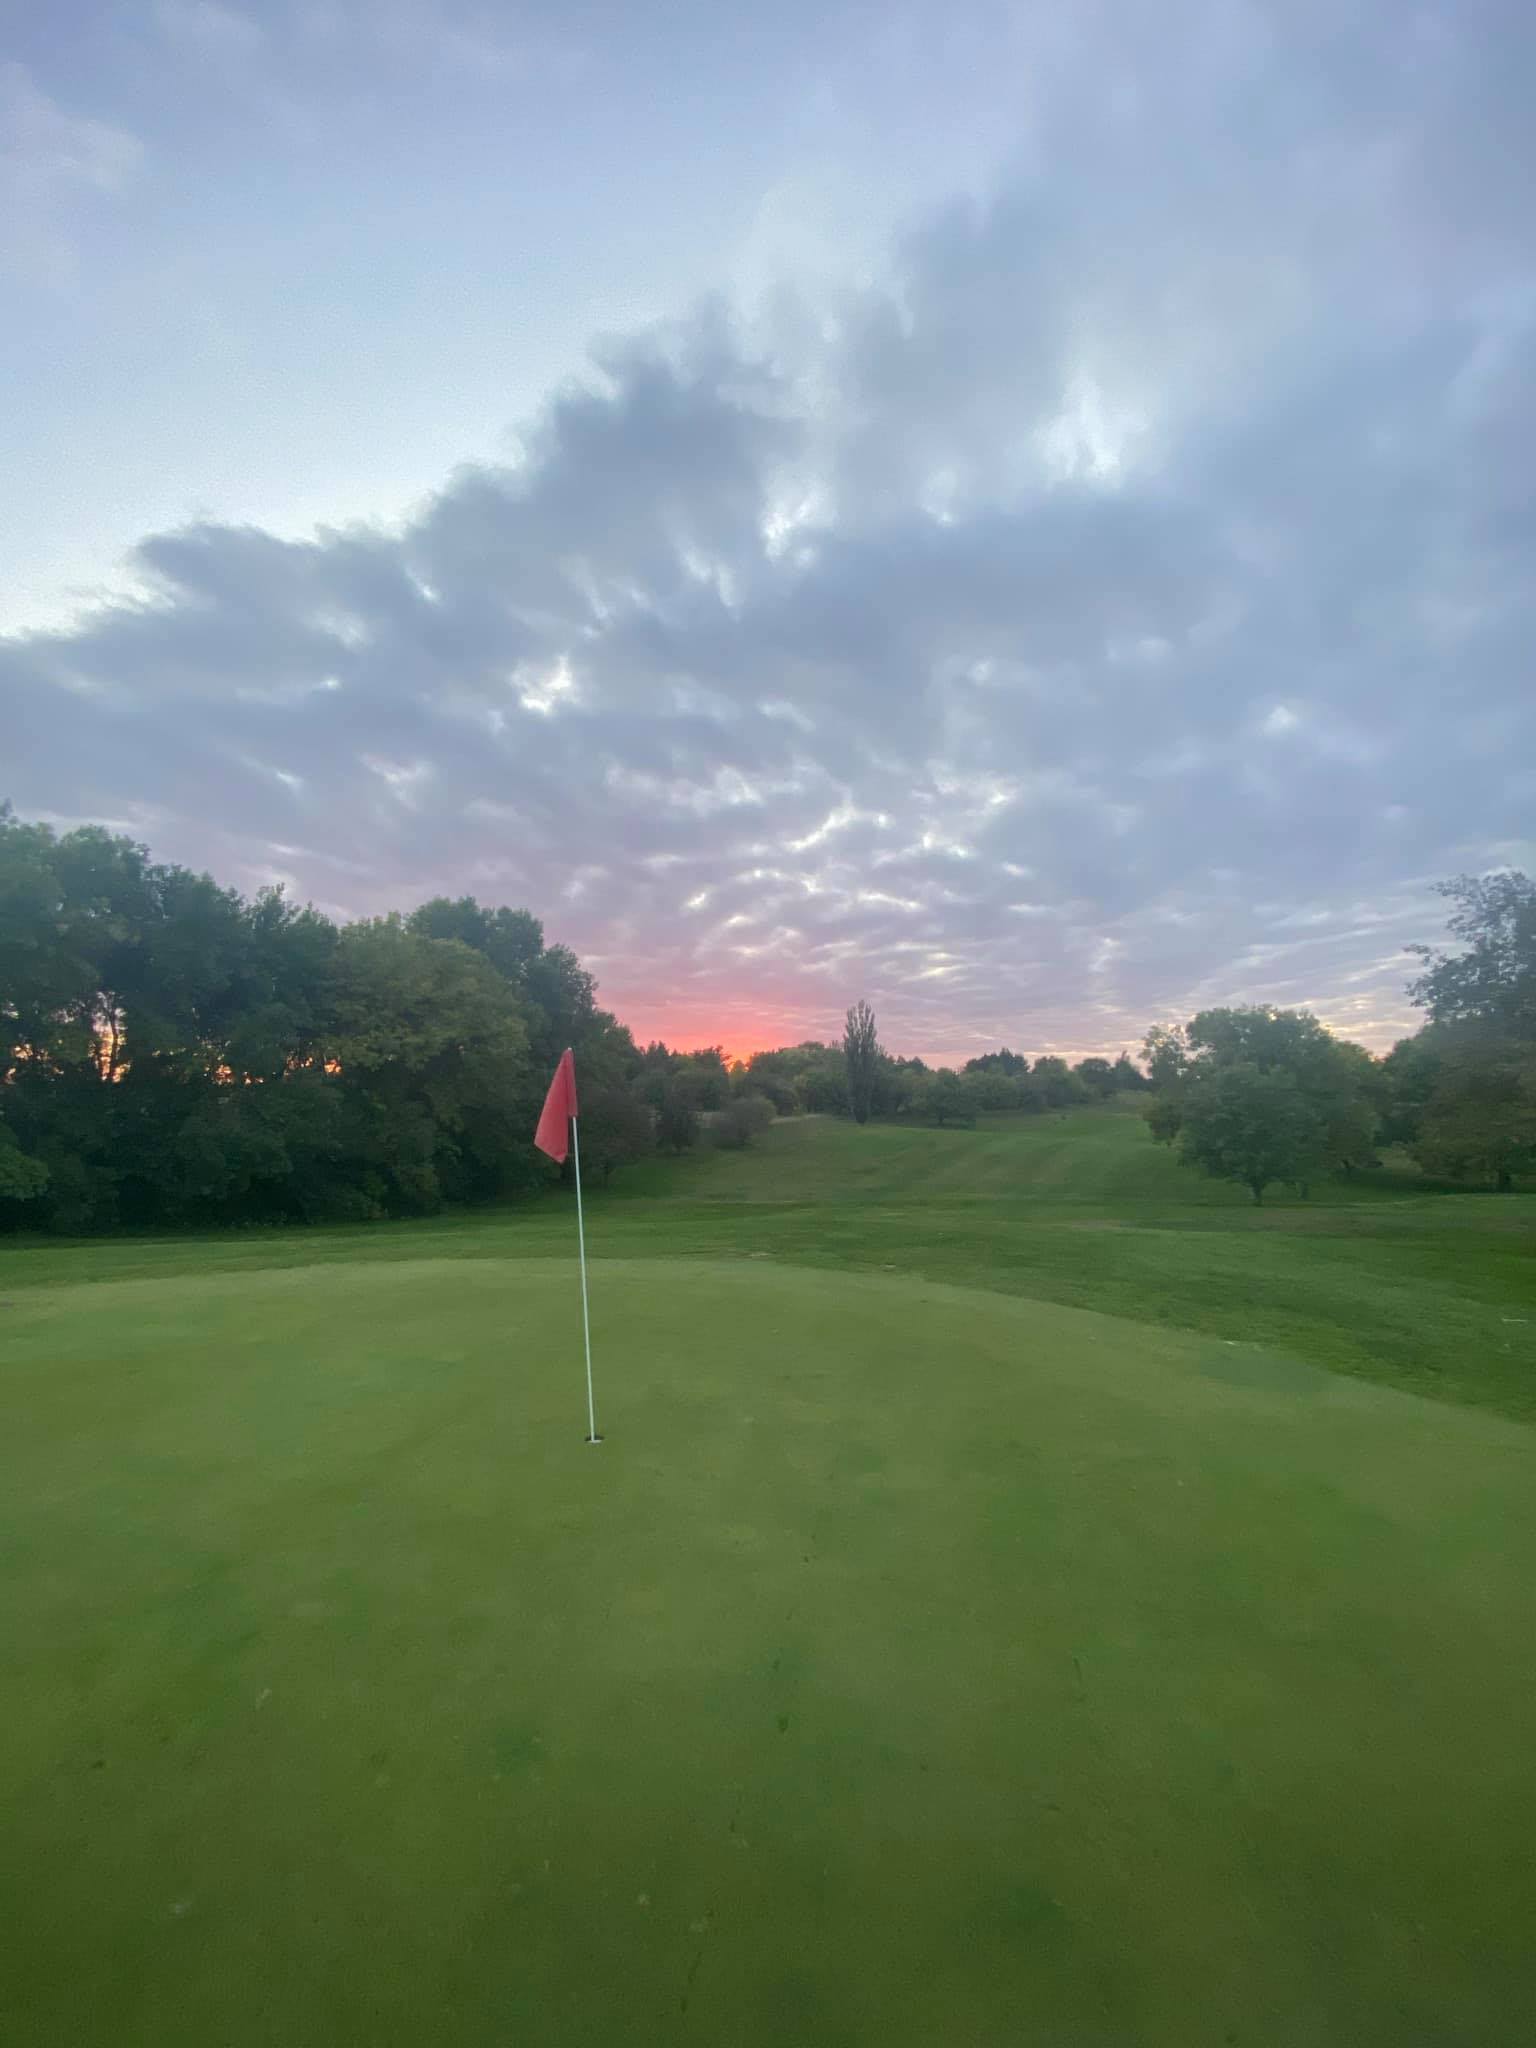 golf course at sunset